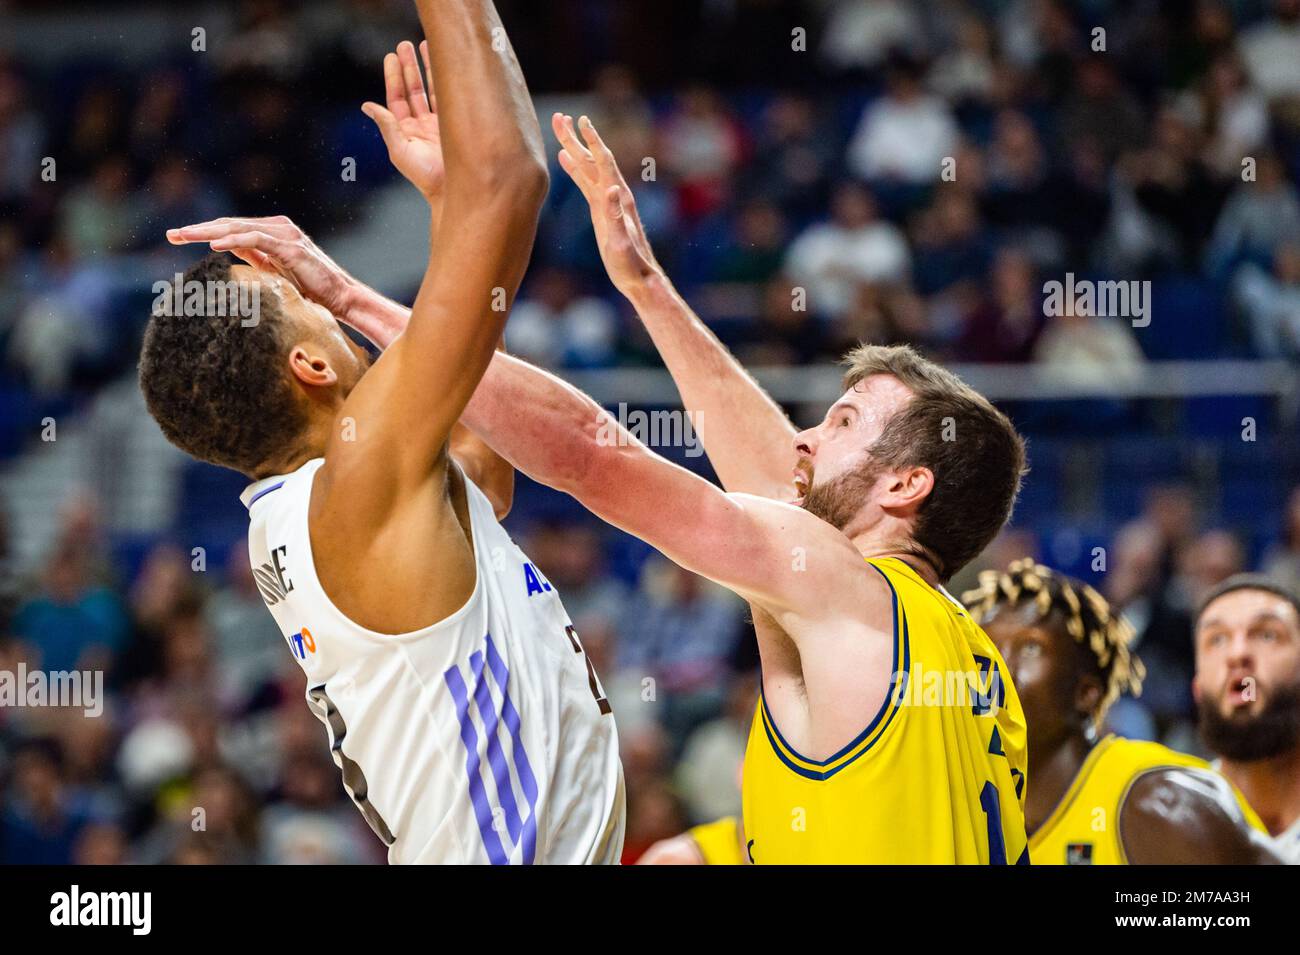 Madrid, Madrid, Spain. 8th Jan, 2023. Edy Tavares (Real Madrid) in action  during the basketball match between Real Madrid and Gran Canaria valid for  the matchday 15 of the spanish basketball league